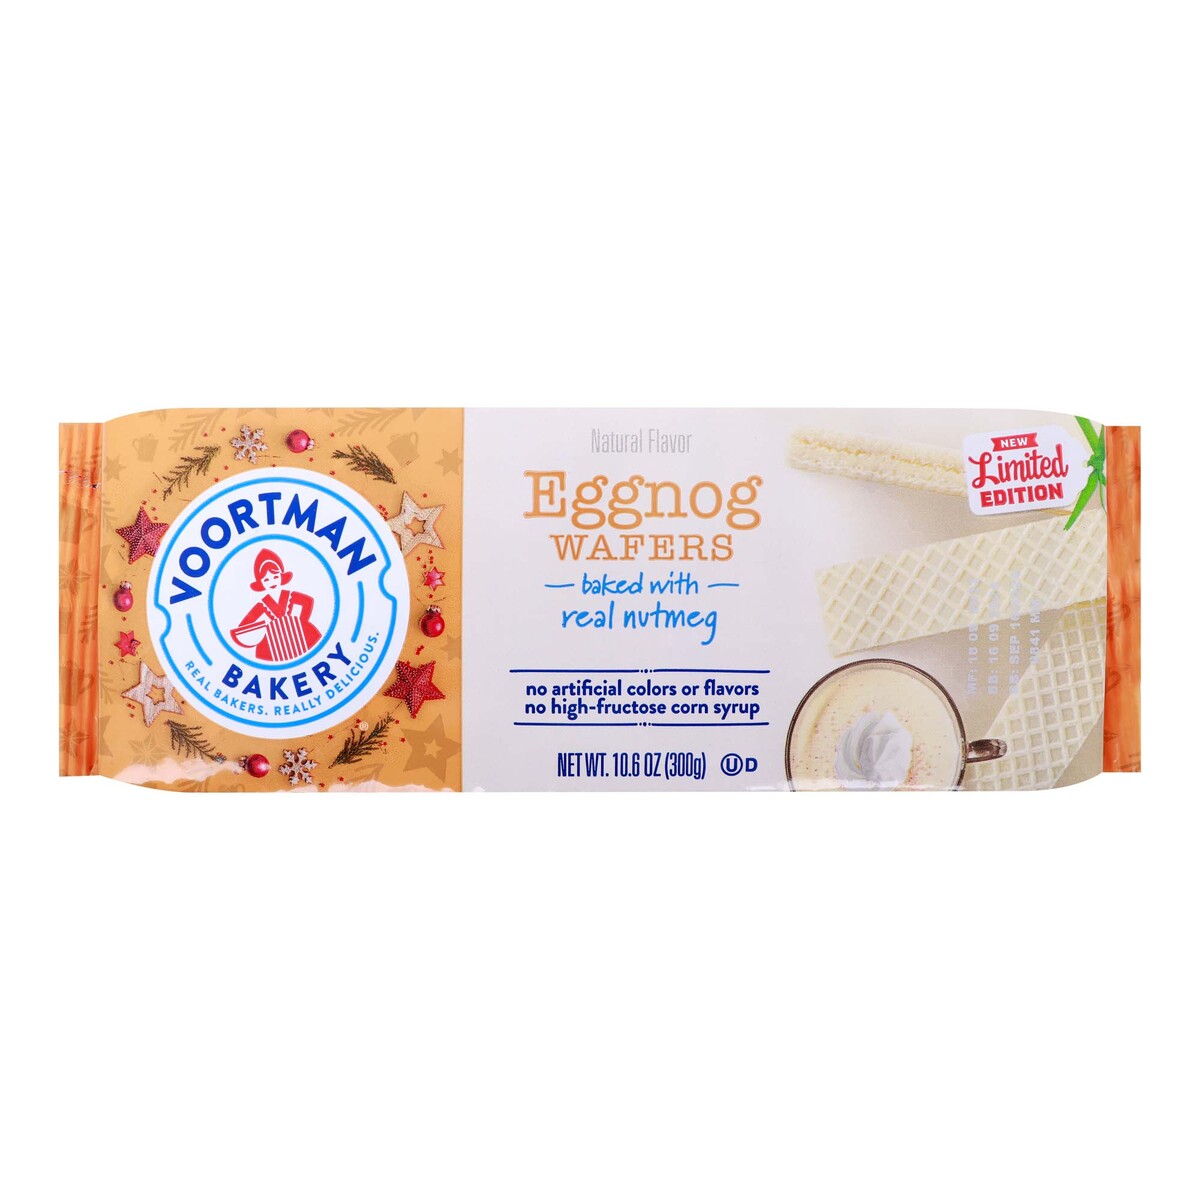 Voortman Eggnog Wafers Baked with Real Nutmeg Limited Edition 300 g